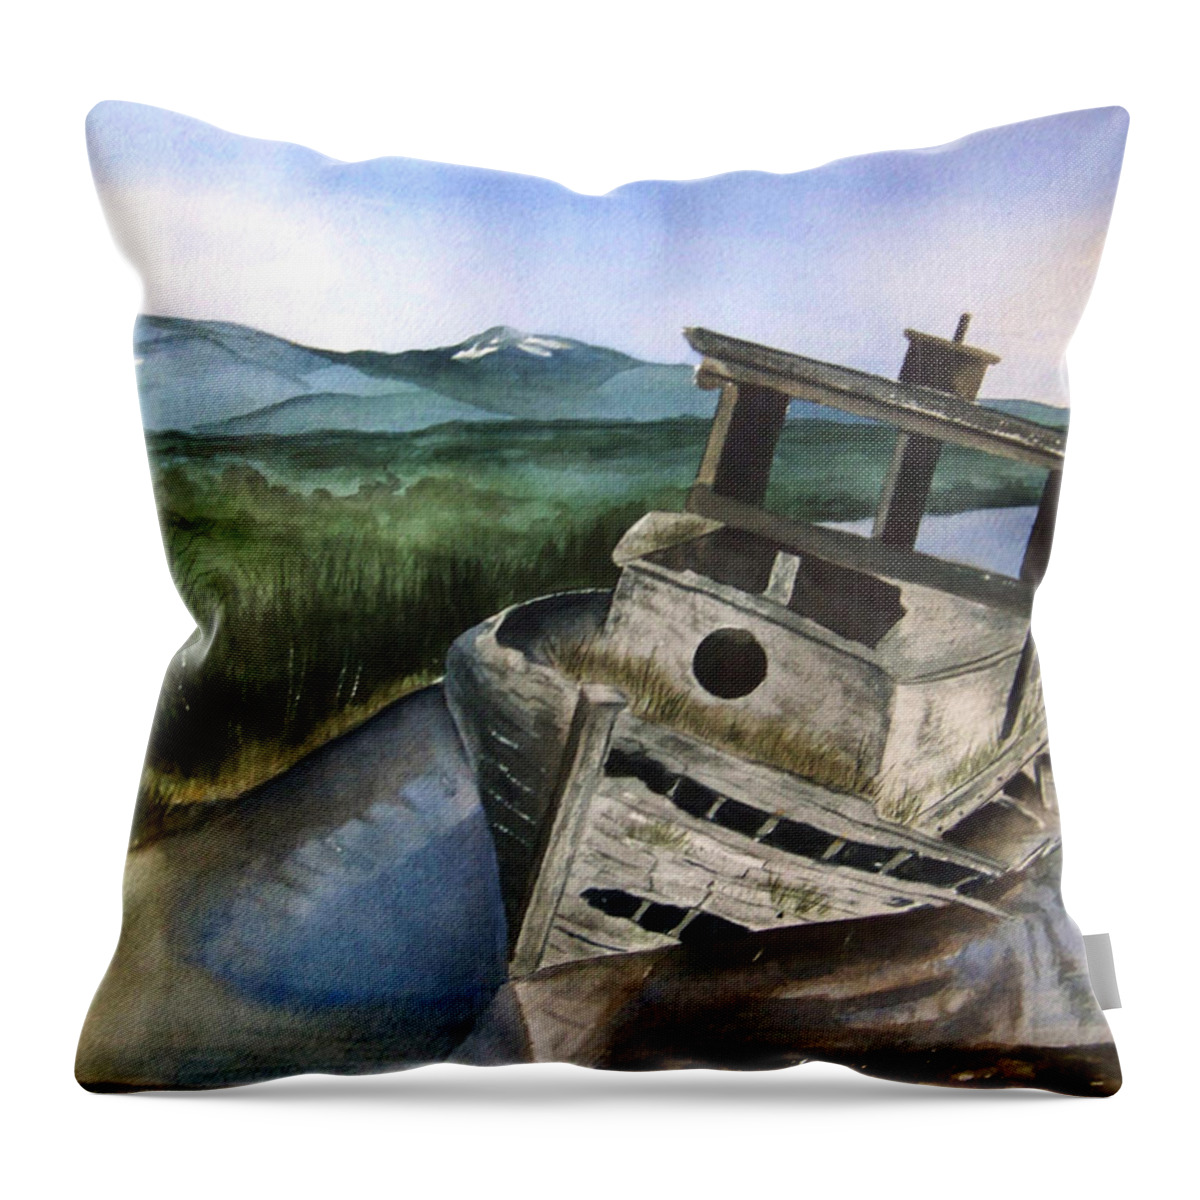 Watercolor Throw Pillow featuring the painting Abandoned by Brenda Owen